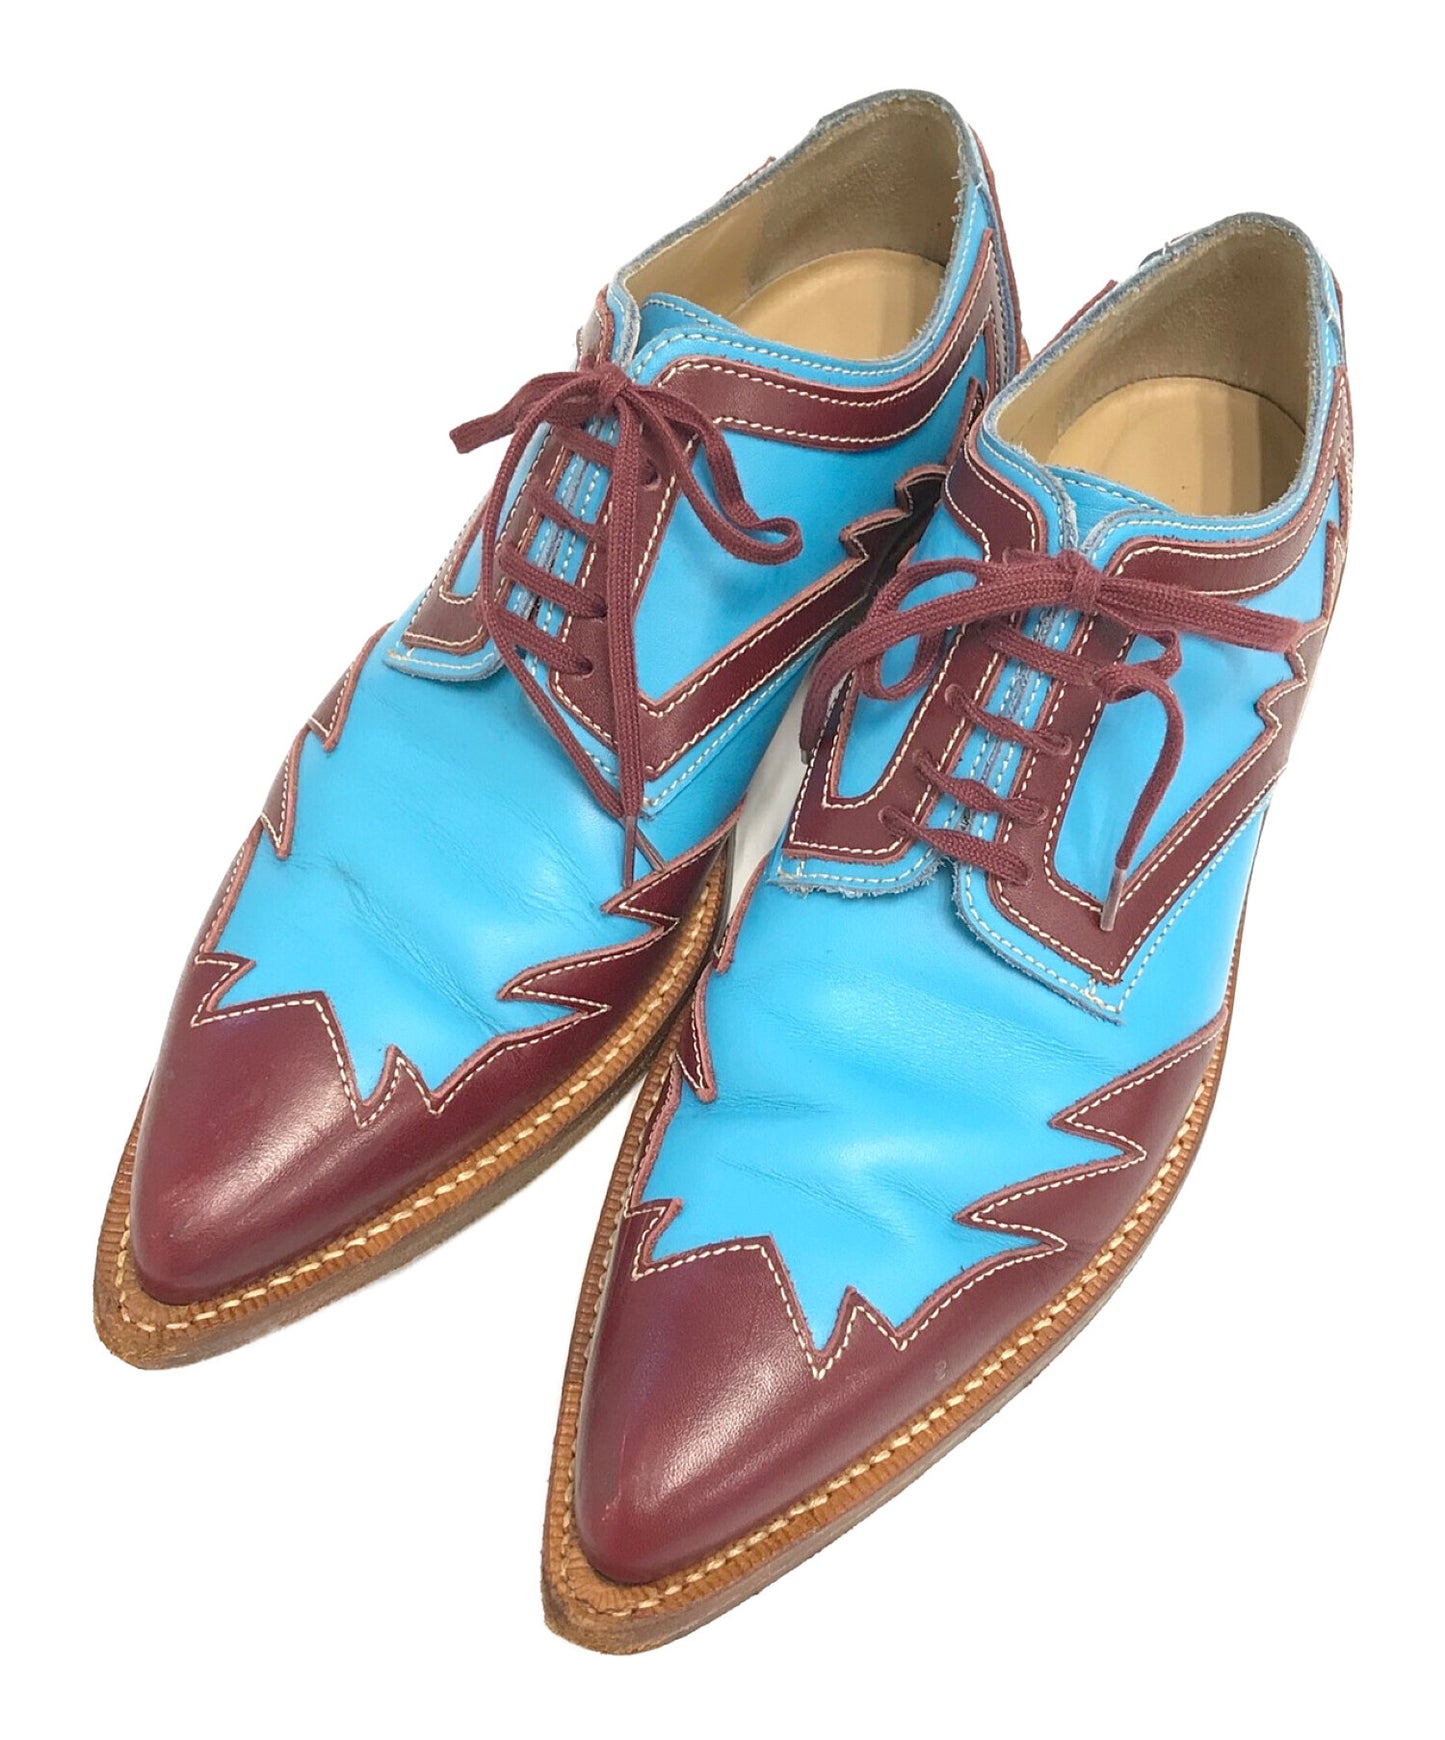 COMME des GARCONS Western style leather shoes | Archive Factory